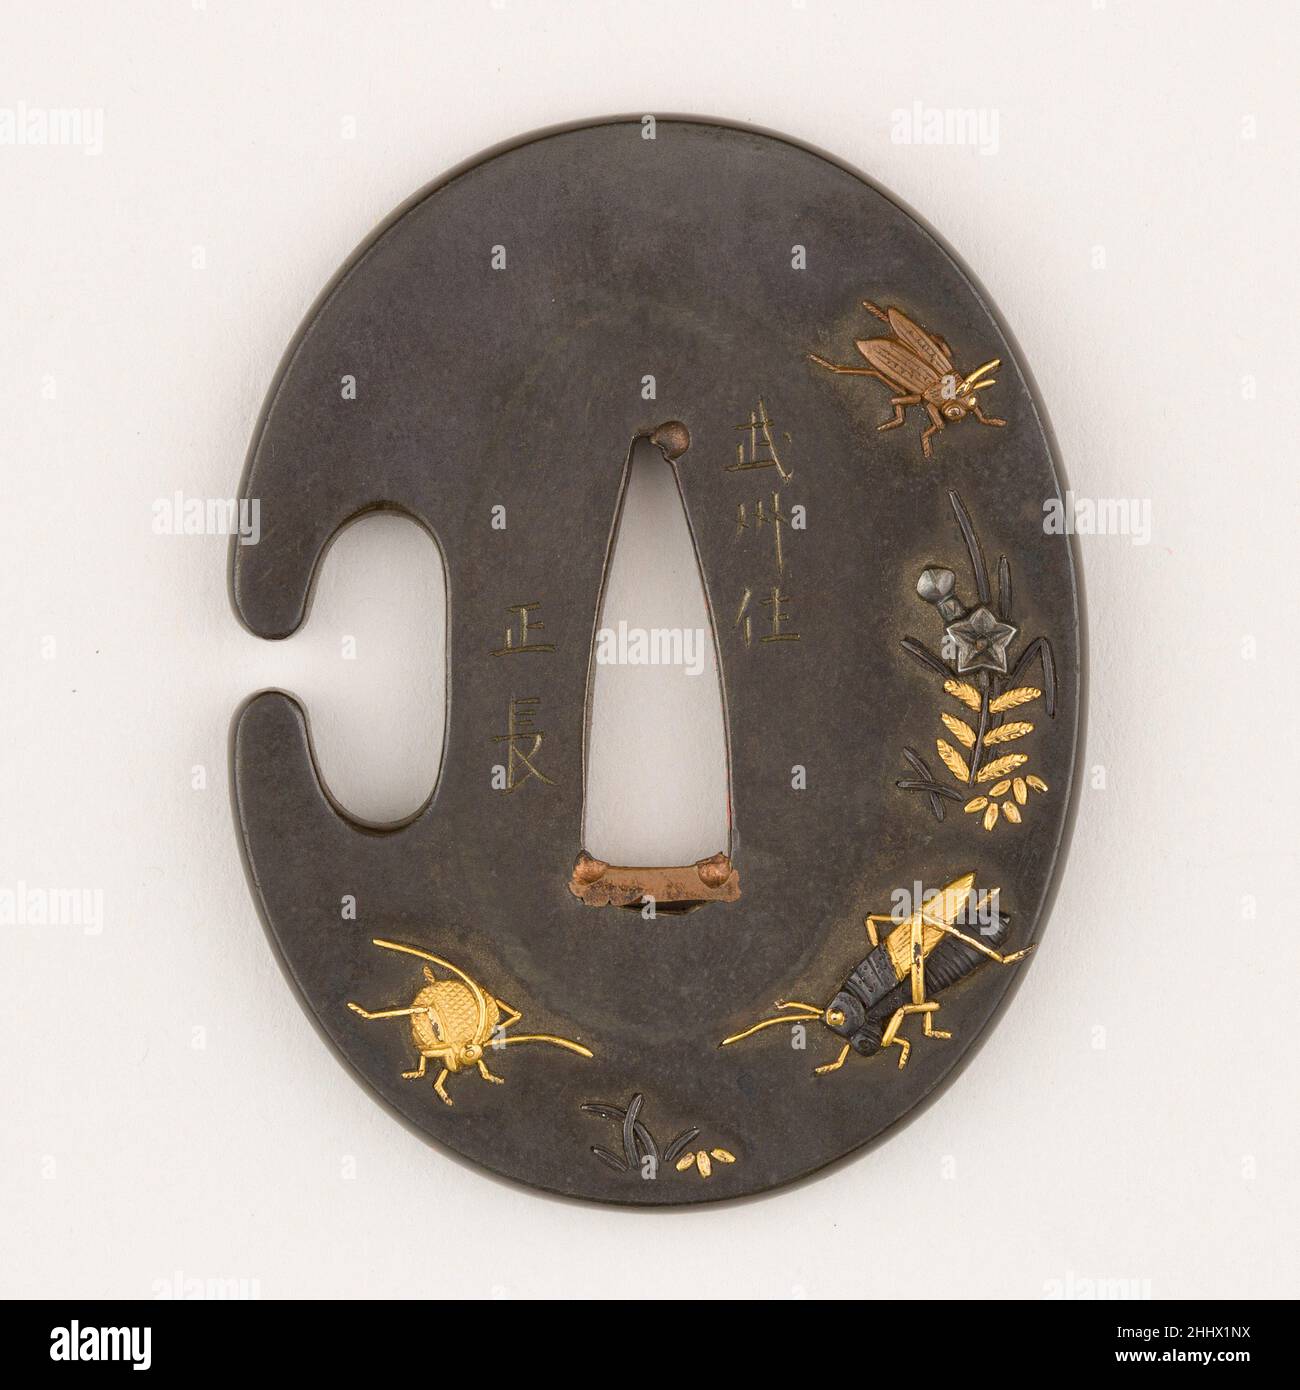 Sword Guard (Tsuba) With the Motif of Insects and Autumnal Vegetation (秋草に虫図鐔) 18th century Japanese This small tantō-tsuba has a polished finish (migaki-ji) and shows in relief (takabori) on the obverse (omote) two crickets (one in gold and one in copper), a grasshopper (in gold and shakudō), and a Chinese bellflower which is one of the Seven Autumnal Flowers. The reverse (ura) is only sparsely decorated with plants towards the bottom left. Throughout the Edo period, there were several artists with the name Masanaga active in Edo, i.e. Musashi province as stated in the signature. For example, Stock Photo